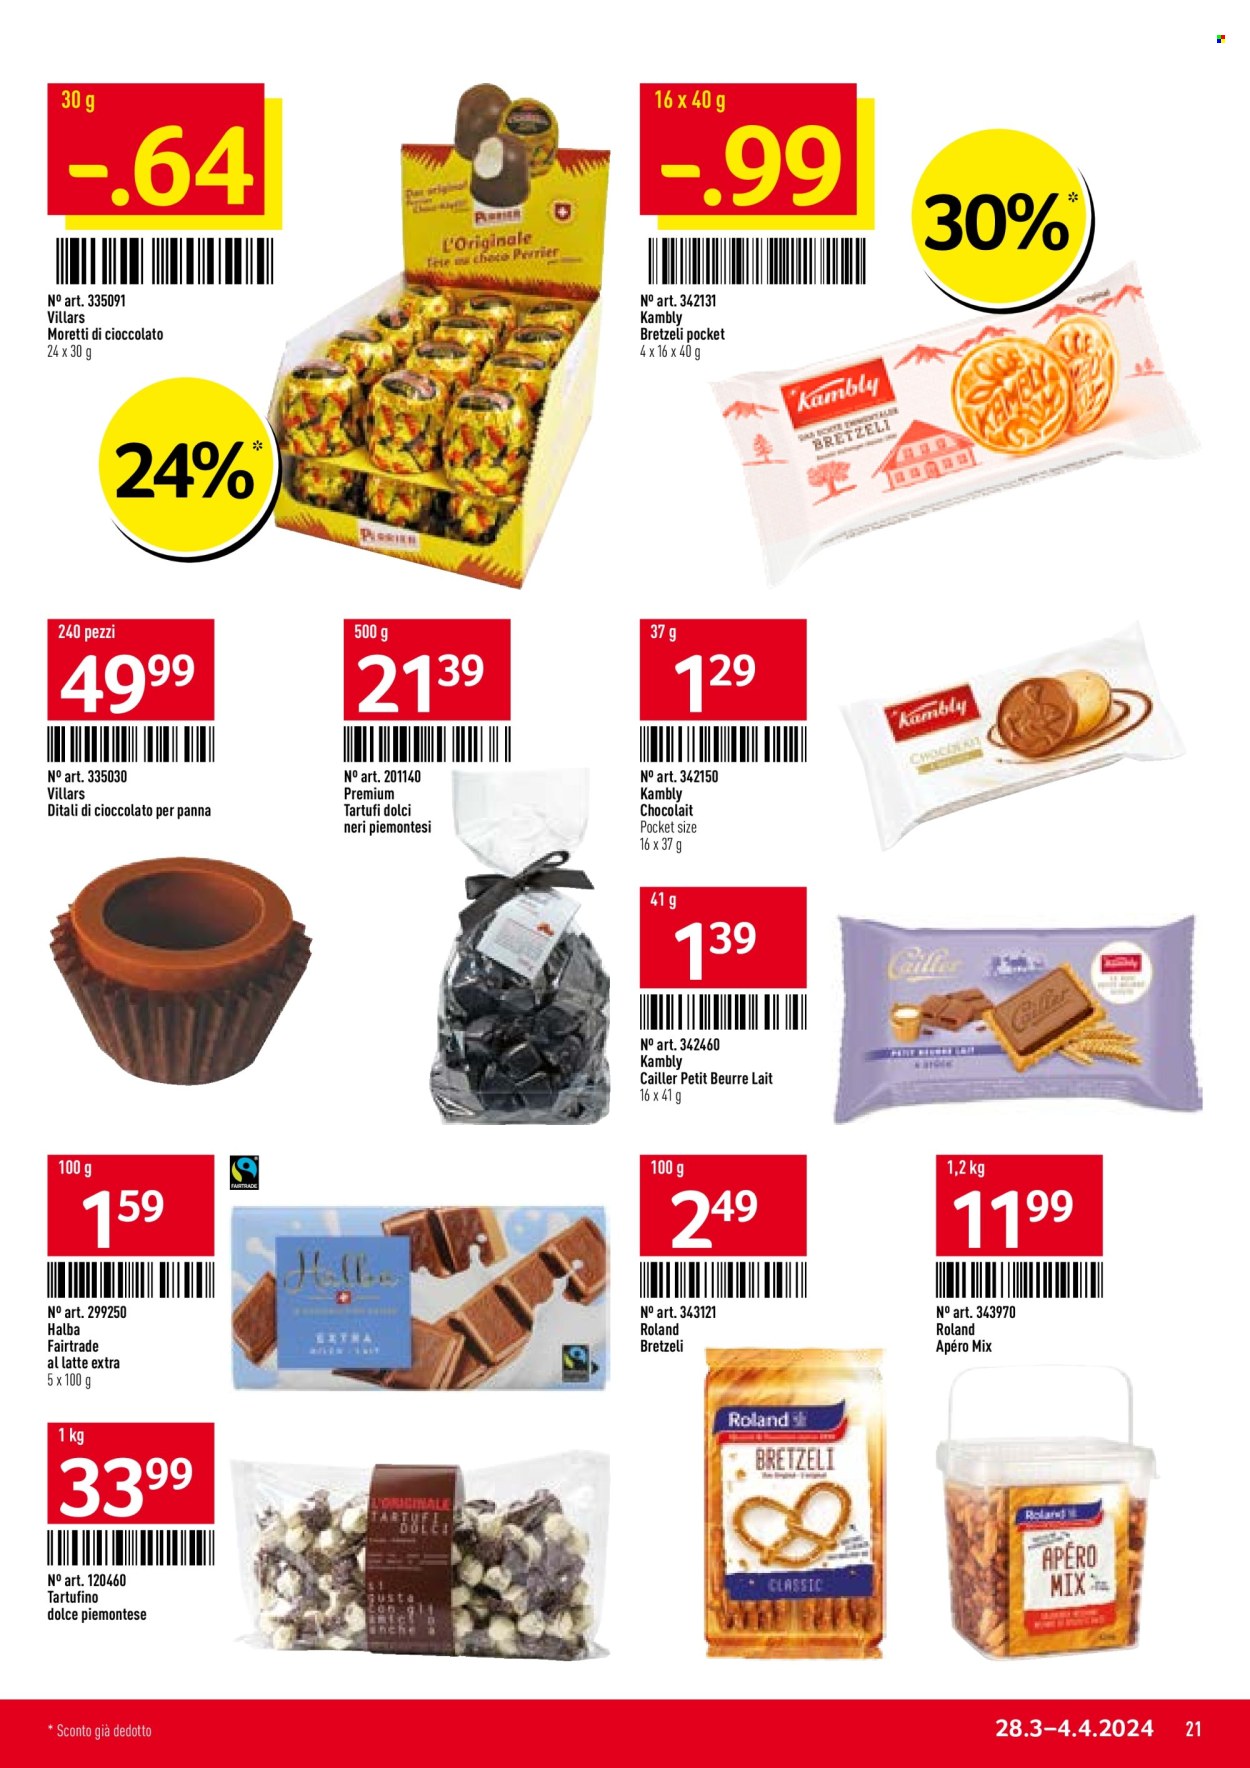 Catalogue TransGourmet - 28.3.2024 - 4.4.2024. Page 21.